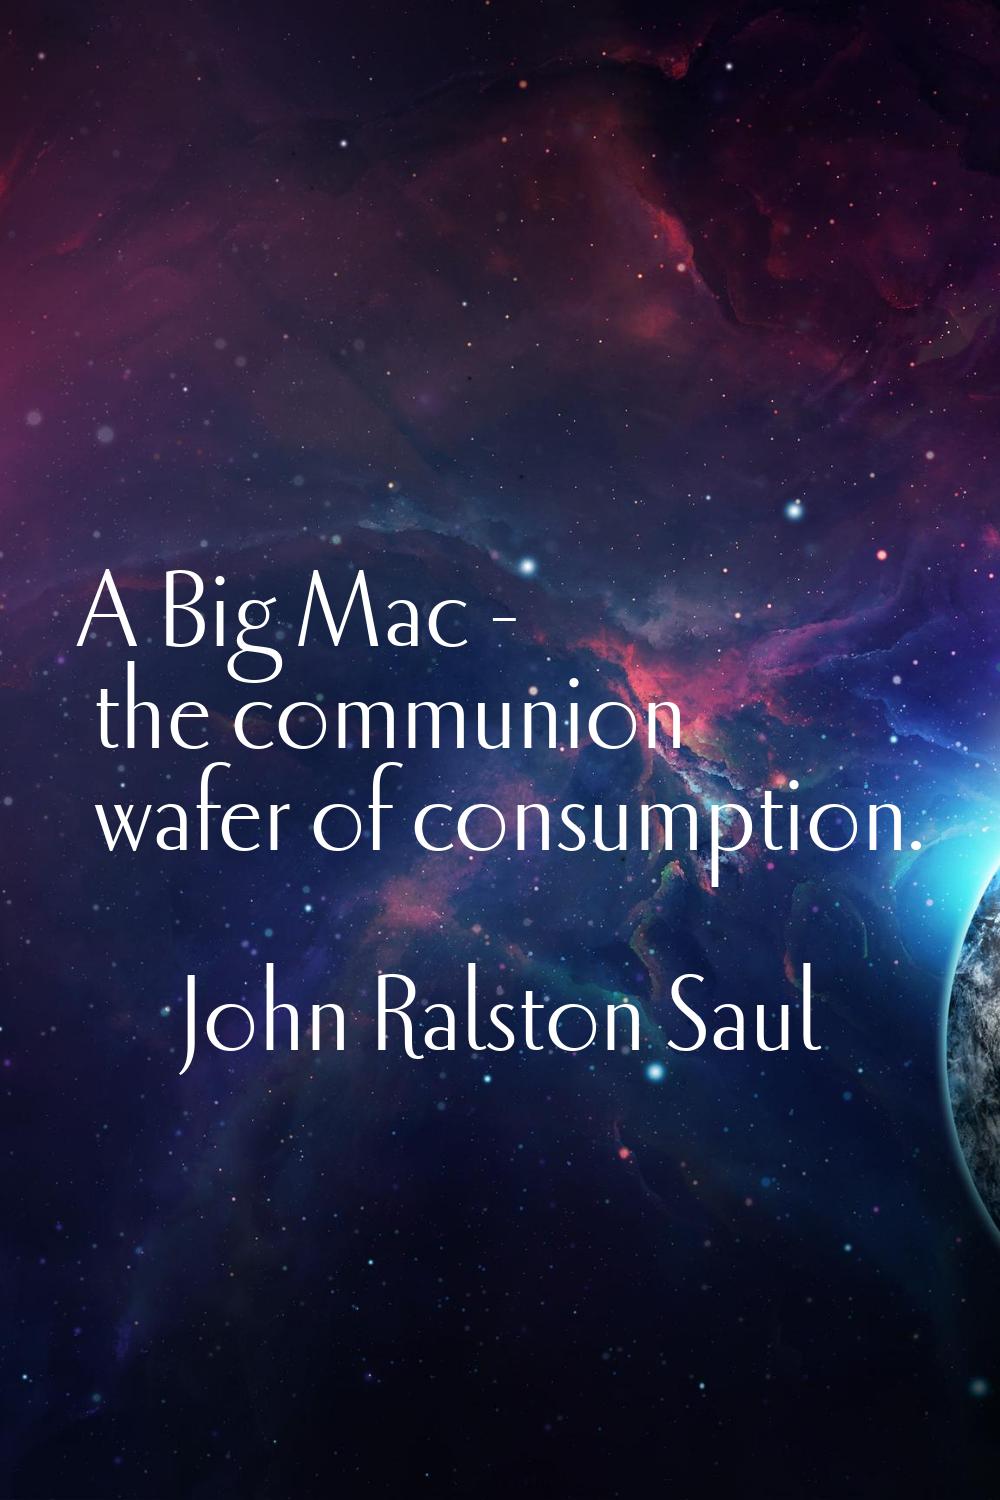 A Big Mac - the communion wafer of consumption.